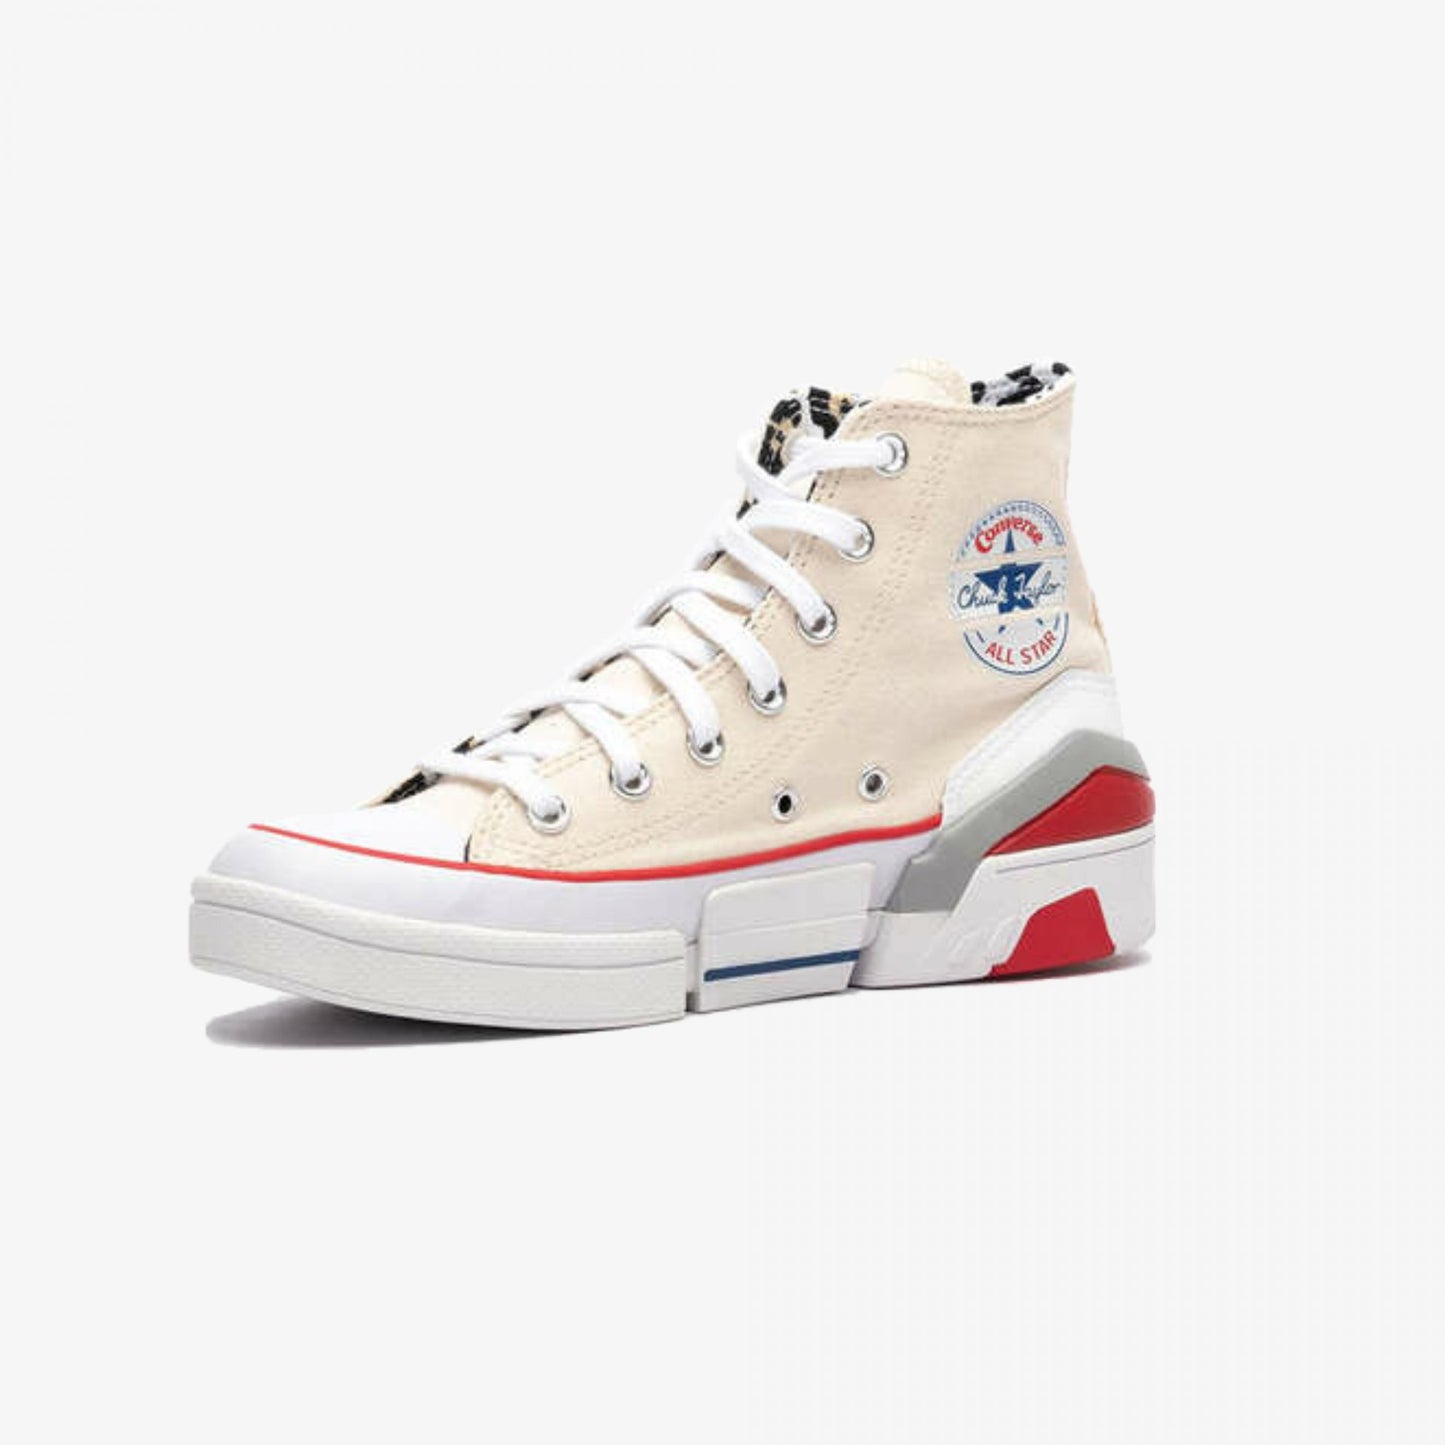 WMN'S  Chuck Taylor All Star-EGRET/WHITE/UNIVERSITY RED